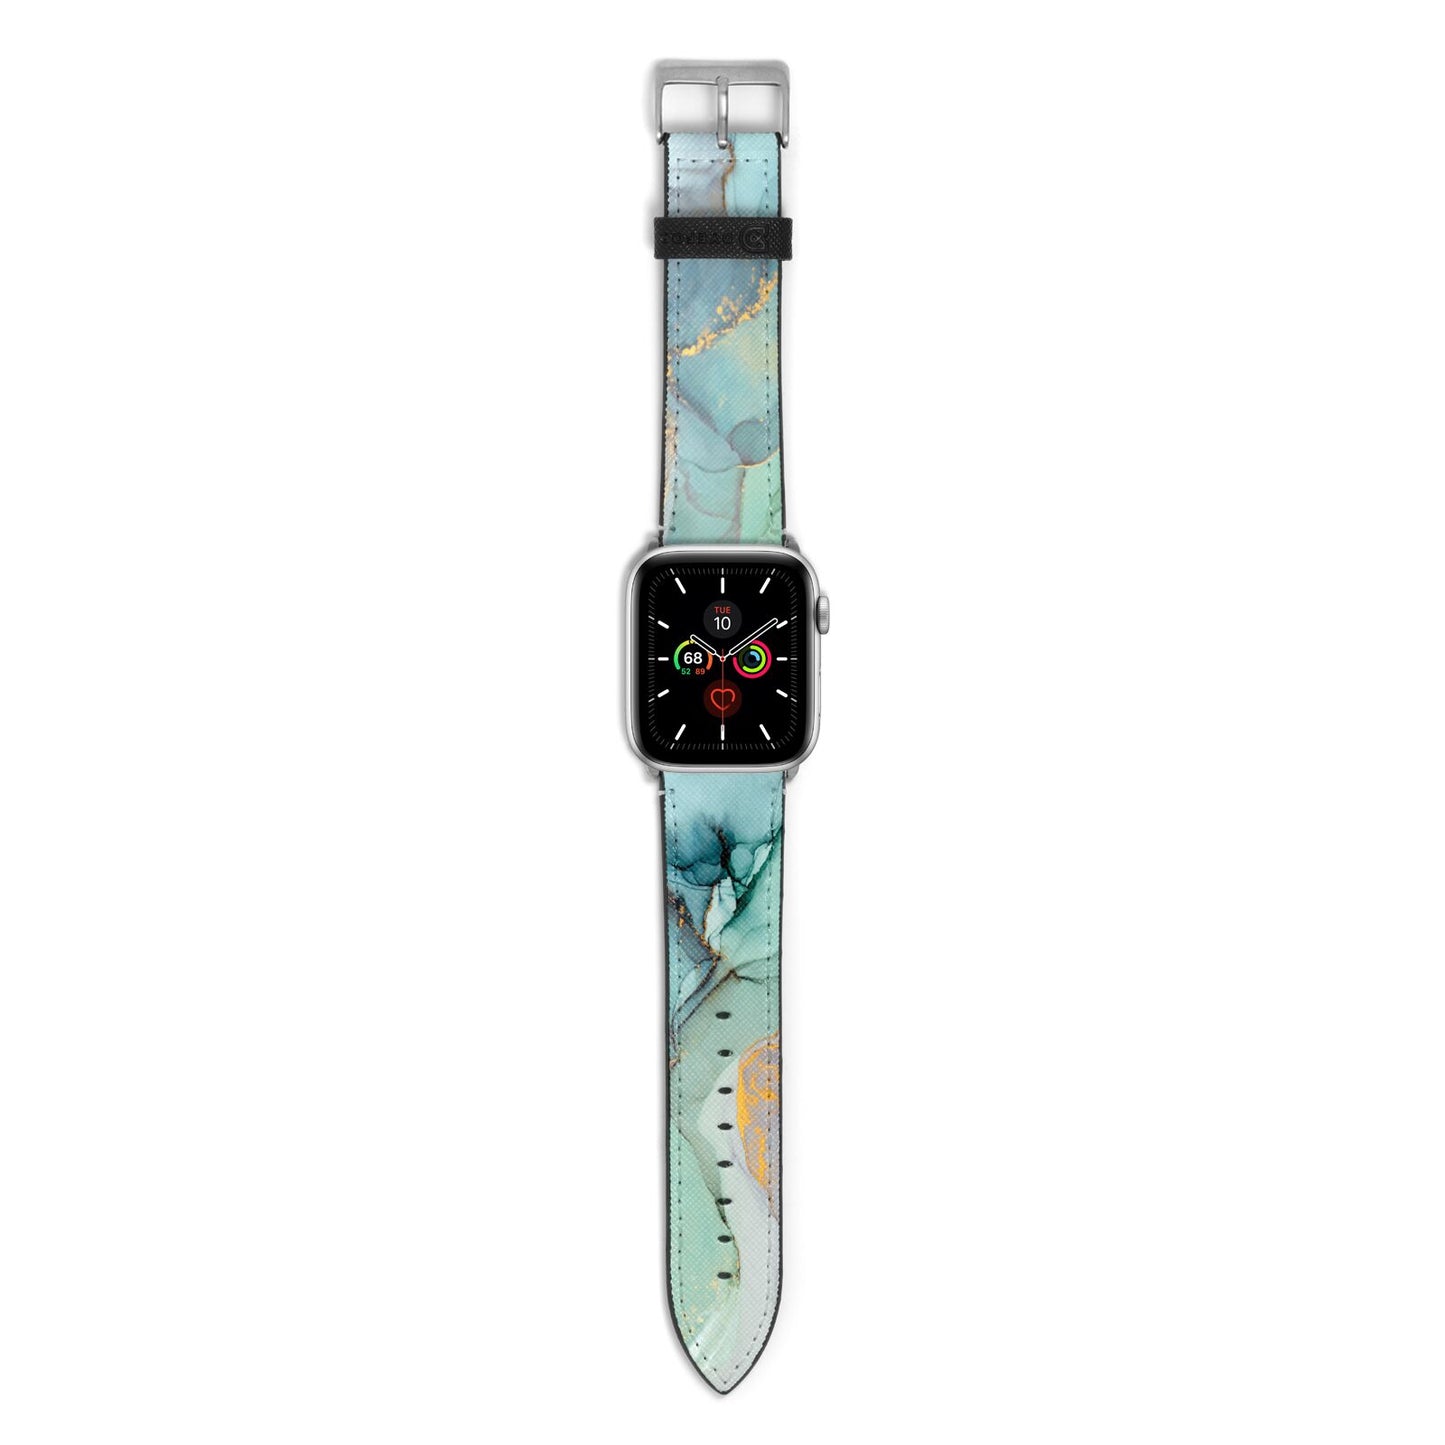 Marble Pattern Apple Watch Strap with Silver Hardware